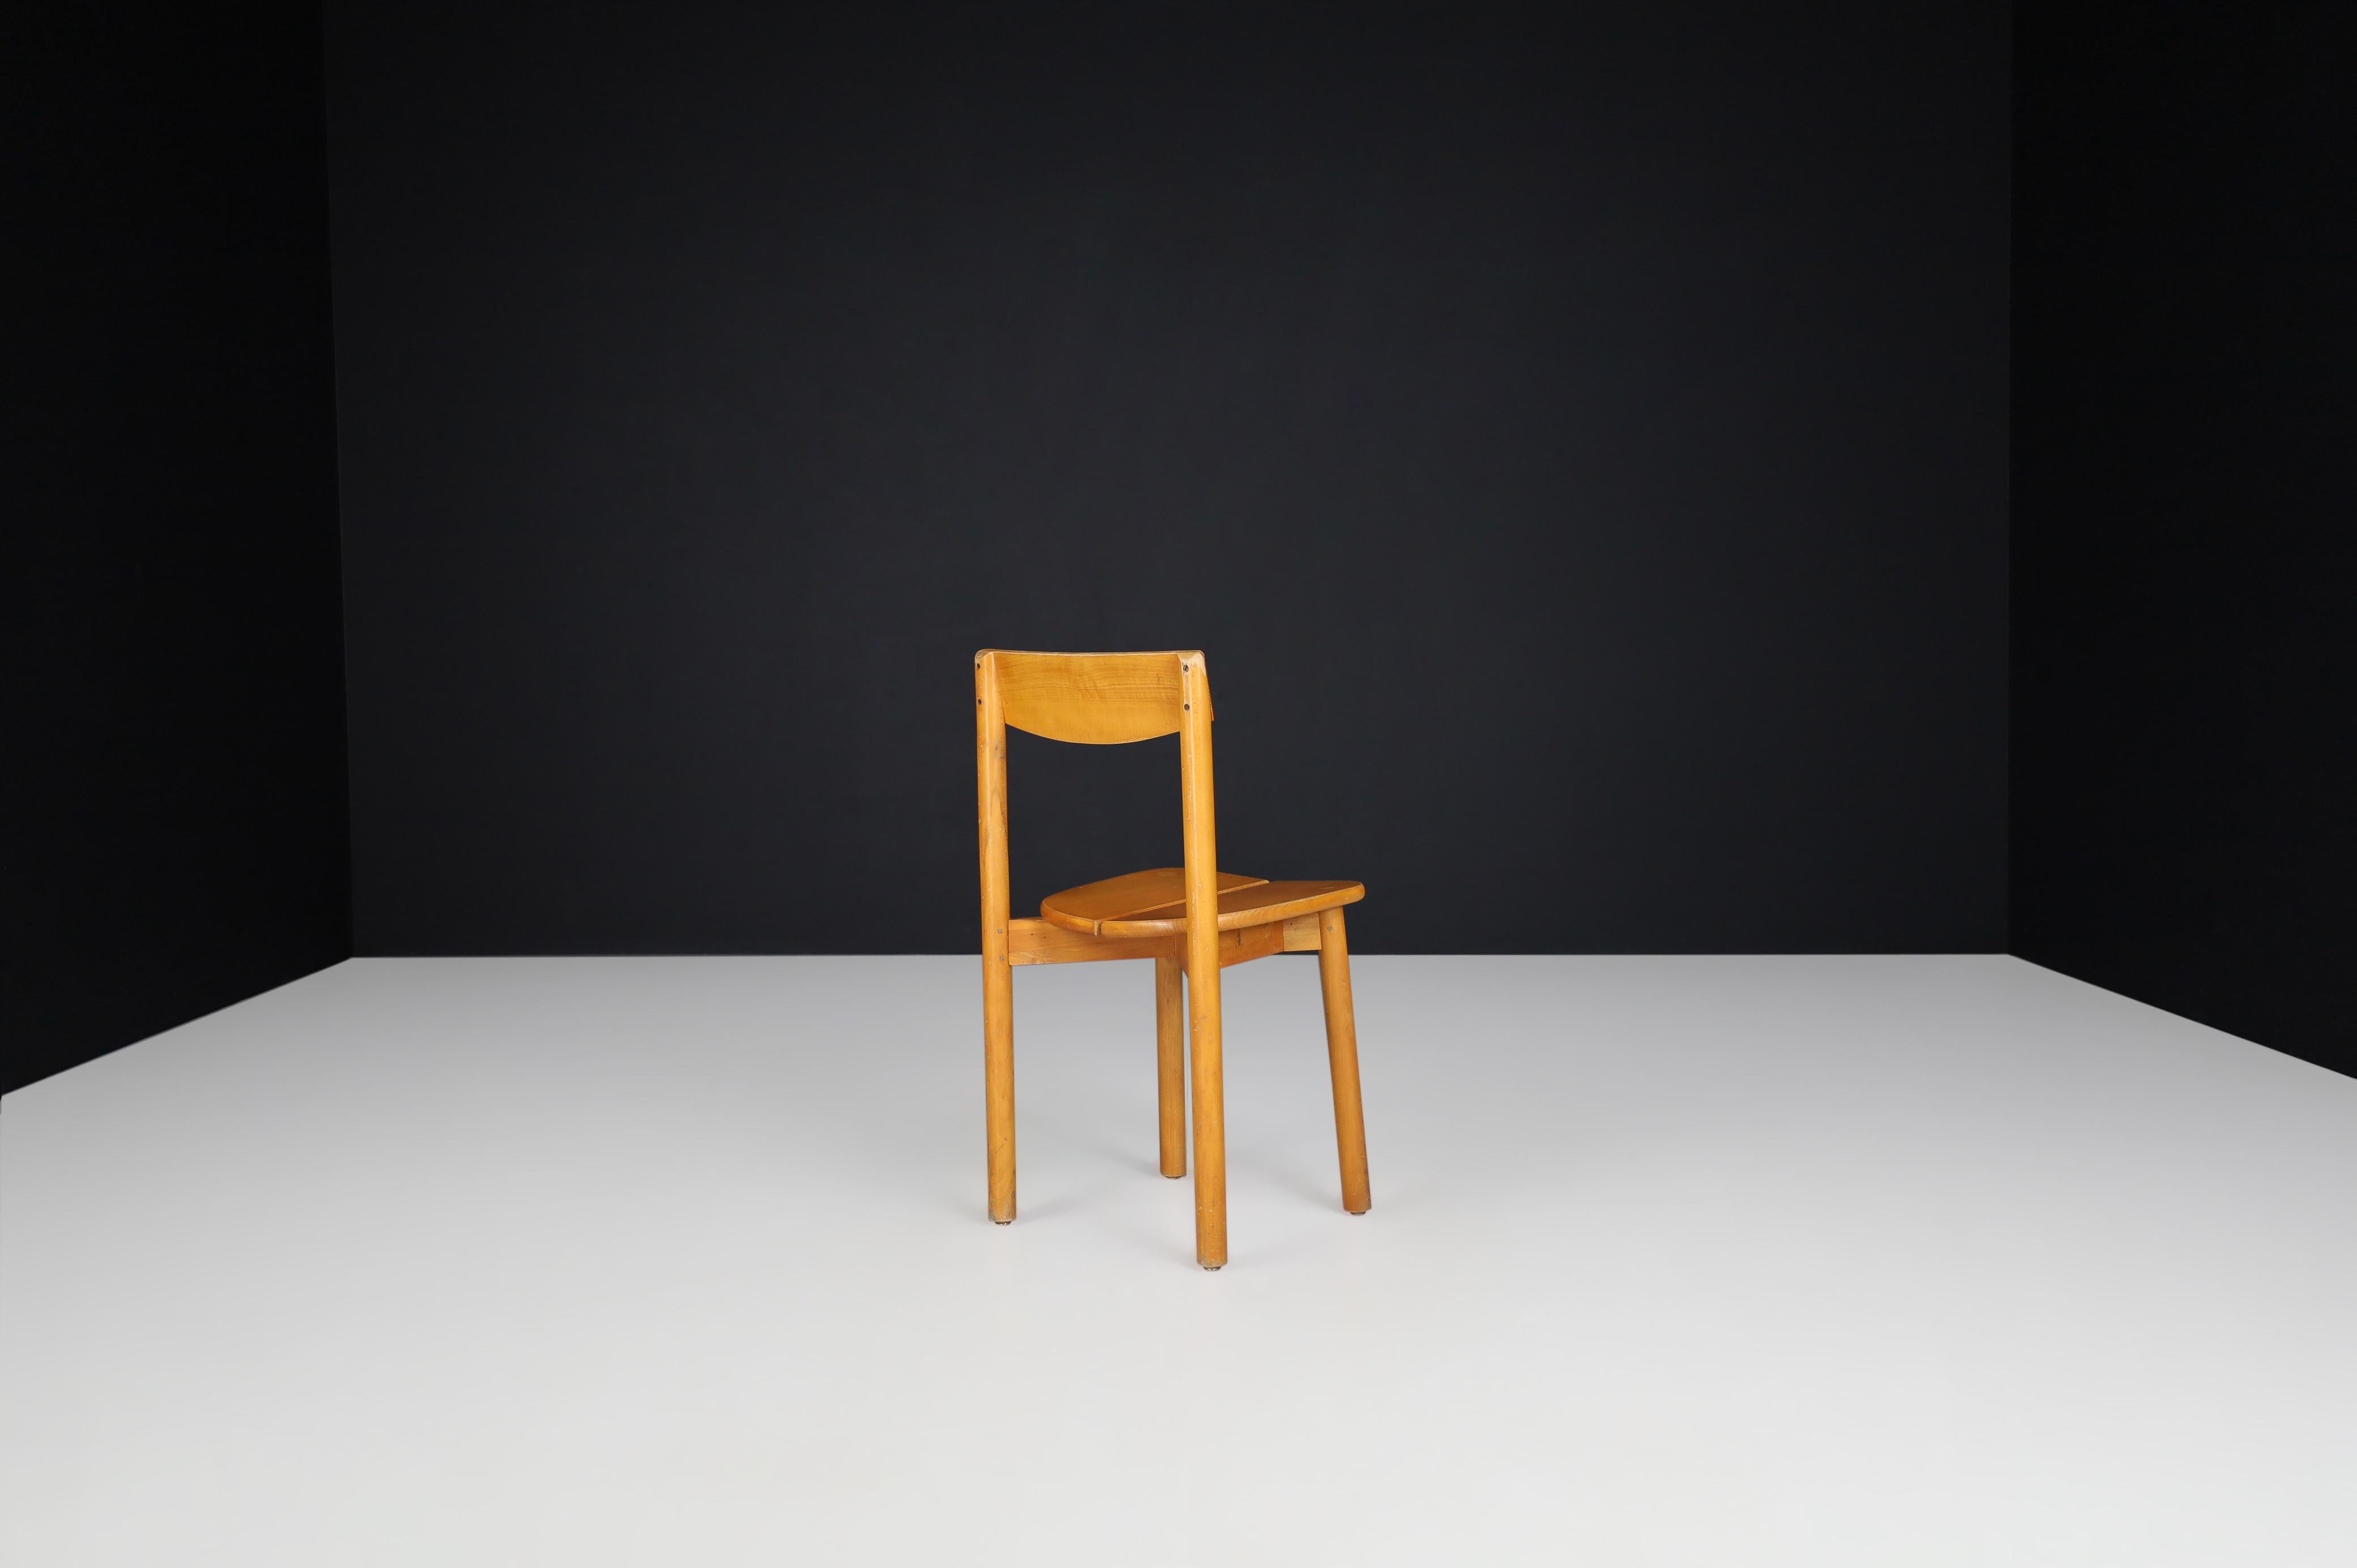 Pierre Gautier Solid Chairs in Blond Beech, France, 1960s For Sale 5